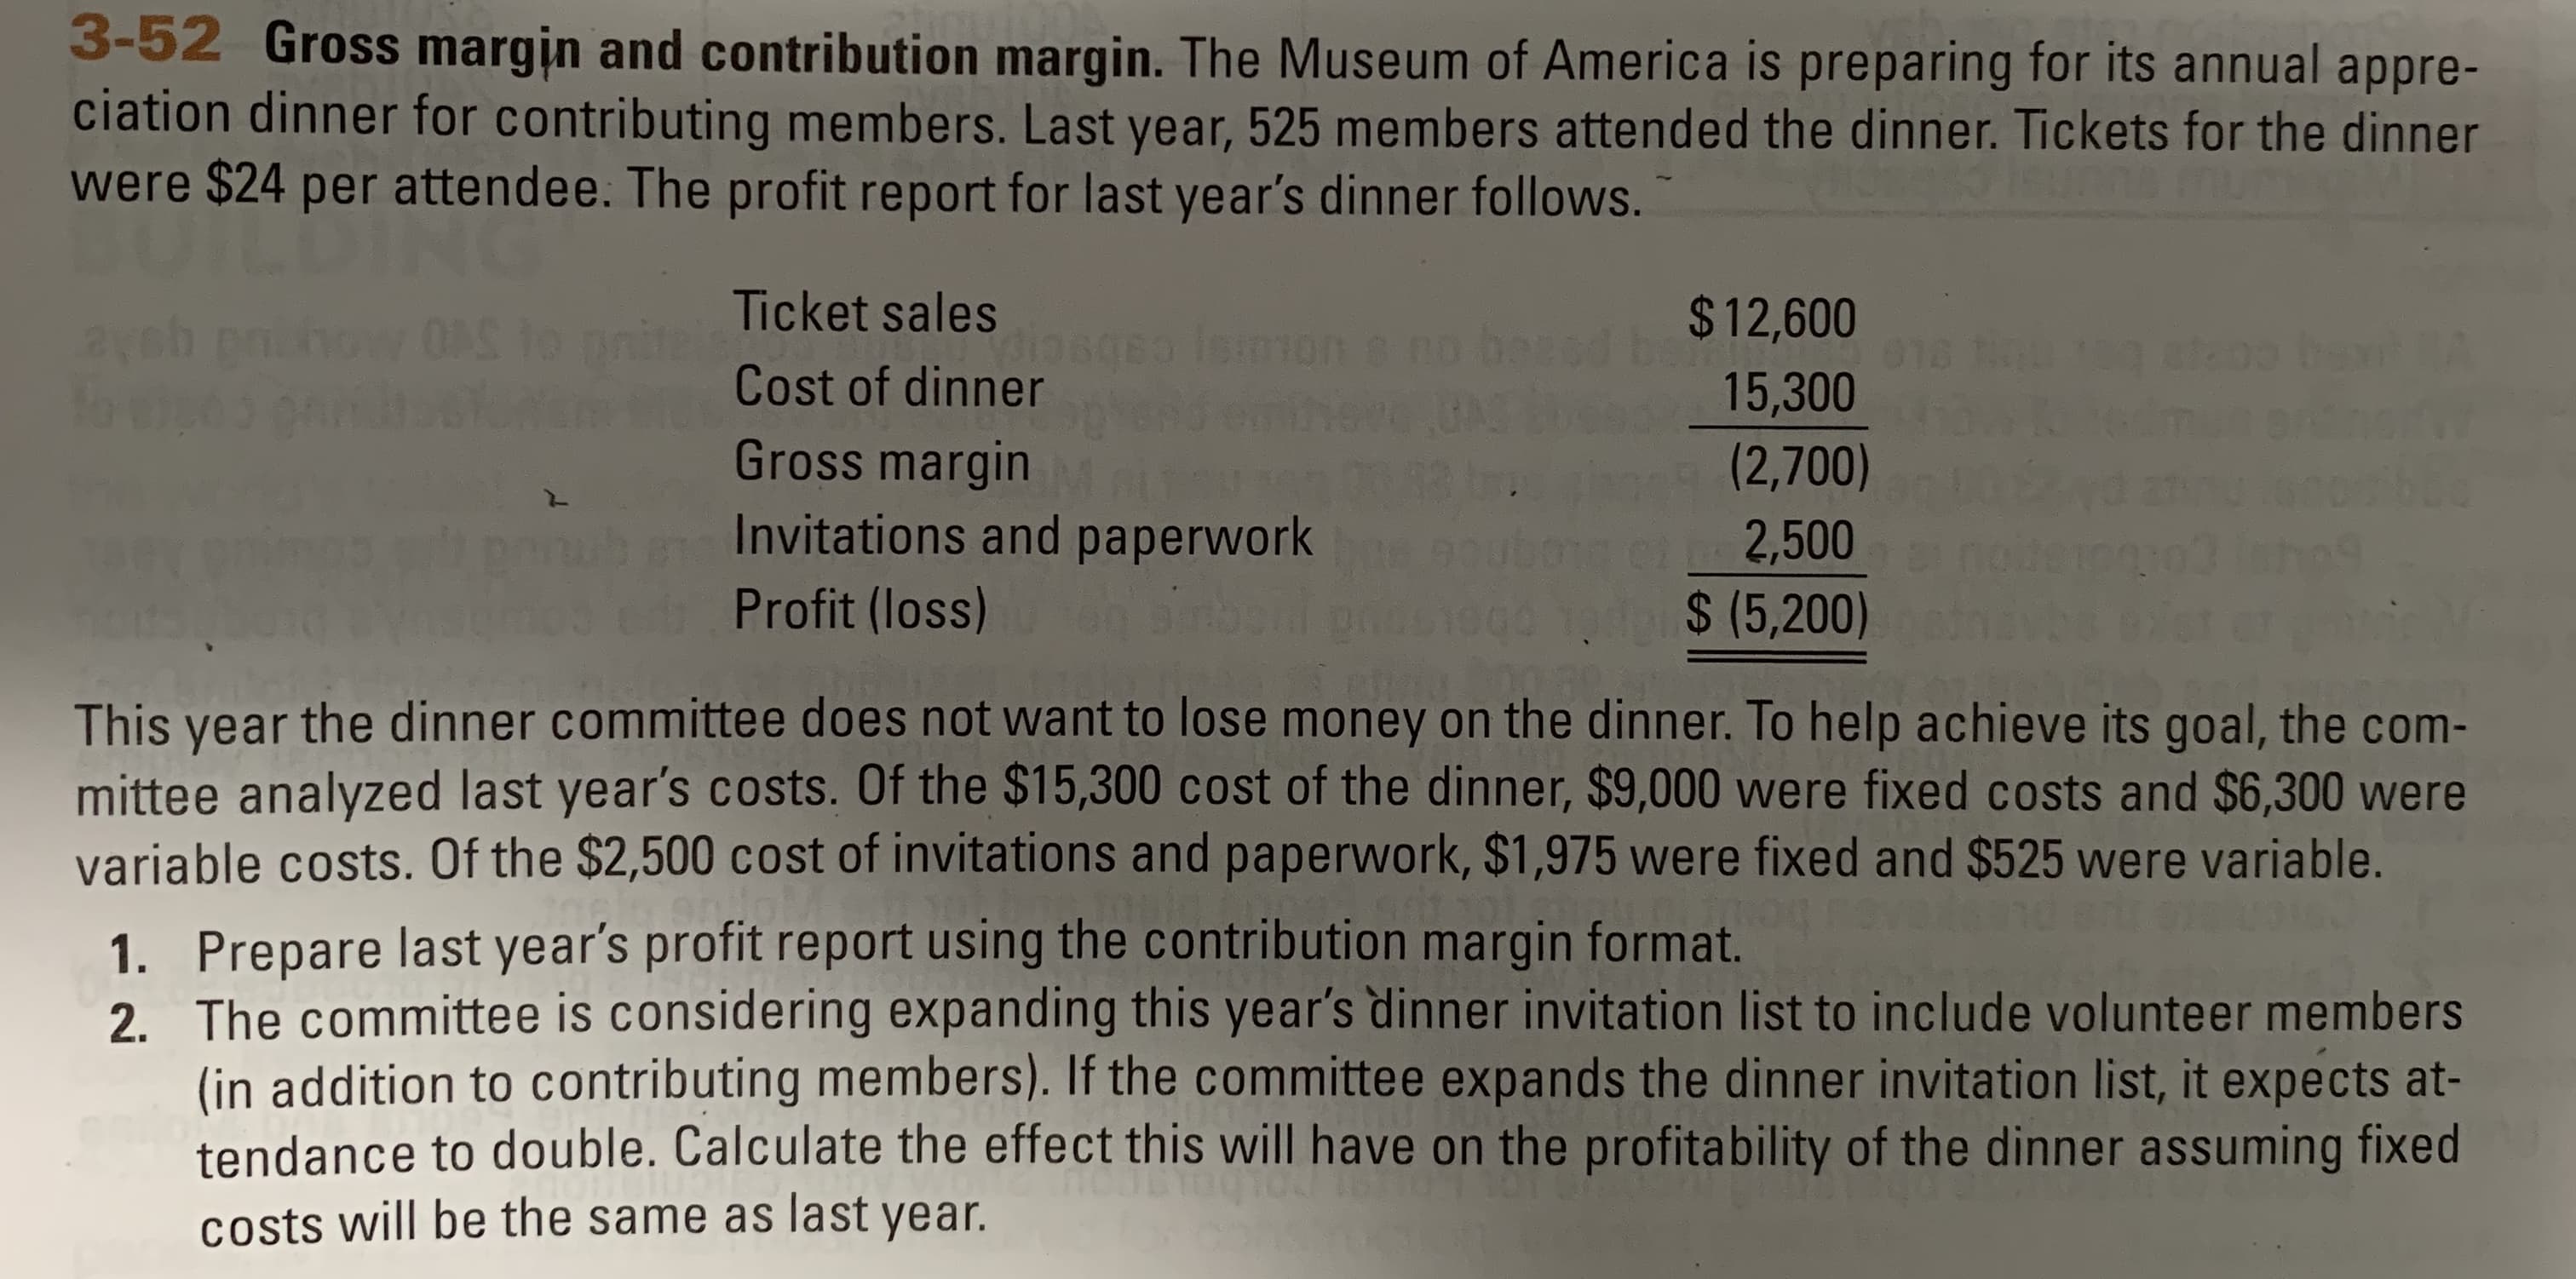 3-52 Gross margin and contribution margin. The Museum of America is preparing for its annual appre-
ciation dinner for contributing members. Last year, 525 members attended the dinner. Tickets for the dinner
were $24 per attendee. The profit report for last year's dinner follows.
Ticket sales
$12,600
ba
15,300
nite
Cost of dinner
texmon s no bee
UNS
ba A
Gross margin
Invitations and paperwork
Profit (loss)
(2,700)
boo
2,500
do$ (5,200)
This year the dinner committee does not want to lose money on the dinner. To help achieve its goal, the com-
mittee analyzed last year's costs. Of the $15,300 cost of the dinner, $9,000 we re fixed costs and $6,300 were
variable costs. Of the $2,500 cost of invitations and paperwork, $1,975 were fixed and $525 were variable.
1. Prepare last year's profit report using the contribution margin format.
2. The committee is considering expanding this year's dinner invitation list to include volunteer members
(in addition to contributing members). If the committee expands the dinner invitation list, it expects at-
tendance to double. Calculate the effect this will have on the profitability of the dinner assuming fixed
Costs will be the same as last year.
